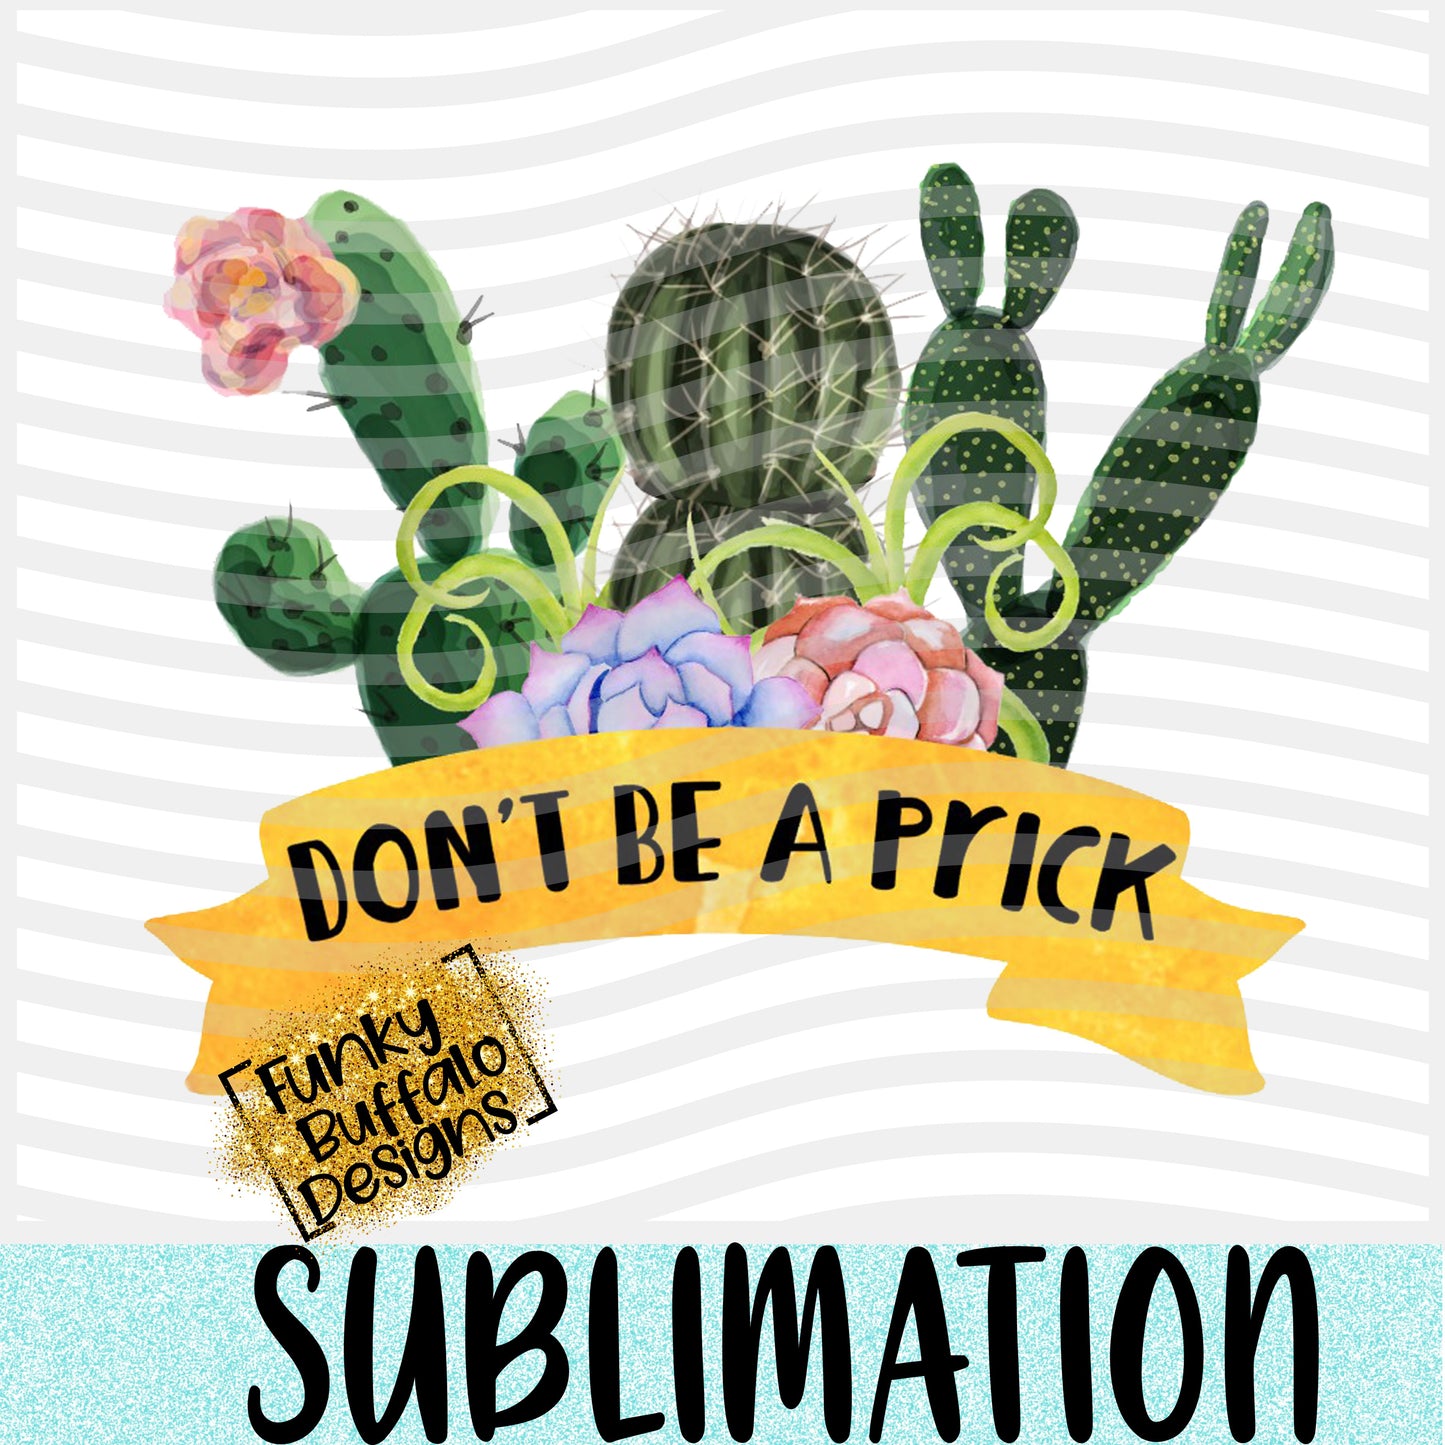 Don't be a Prick